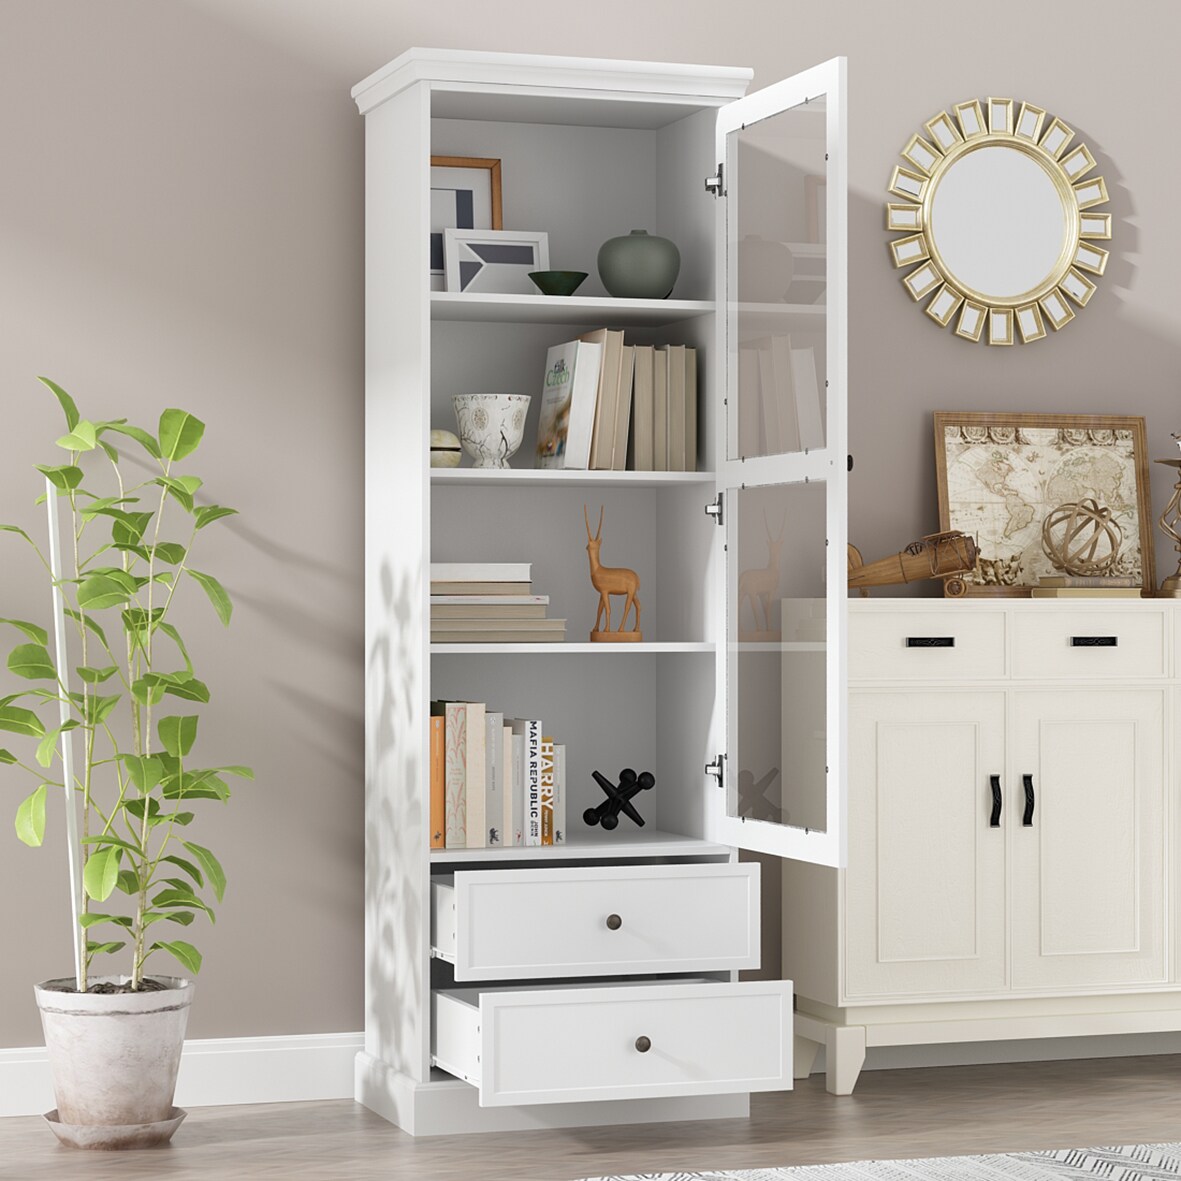 FUFU&GAGA White Particleboard 4-Shelf Bookcase with Doors (23.6-in W x ...